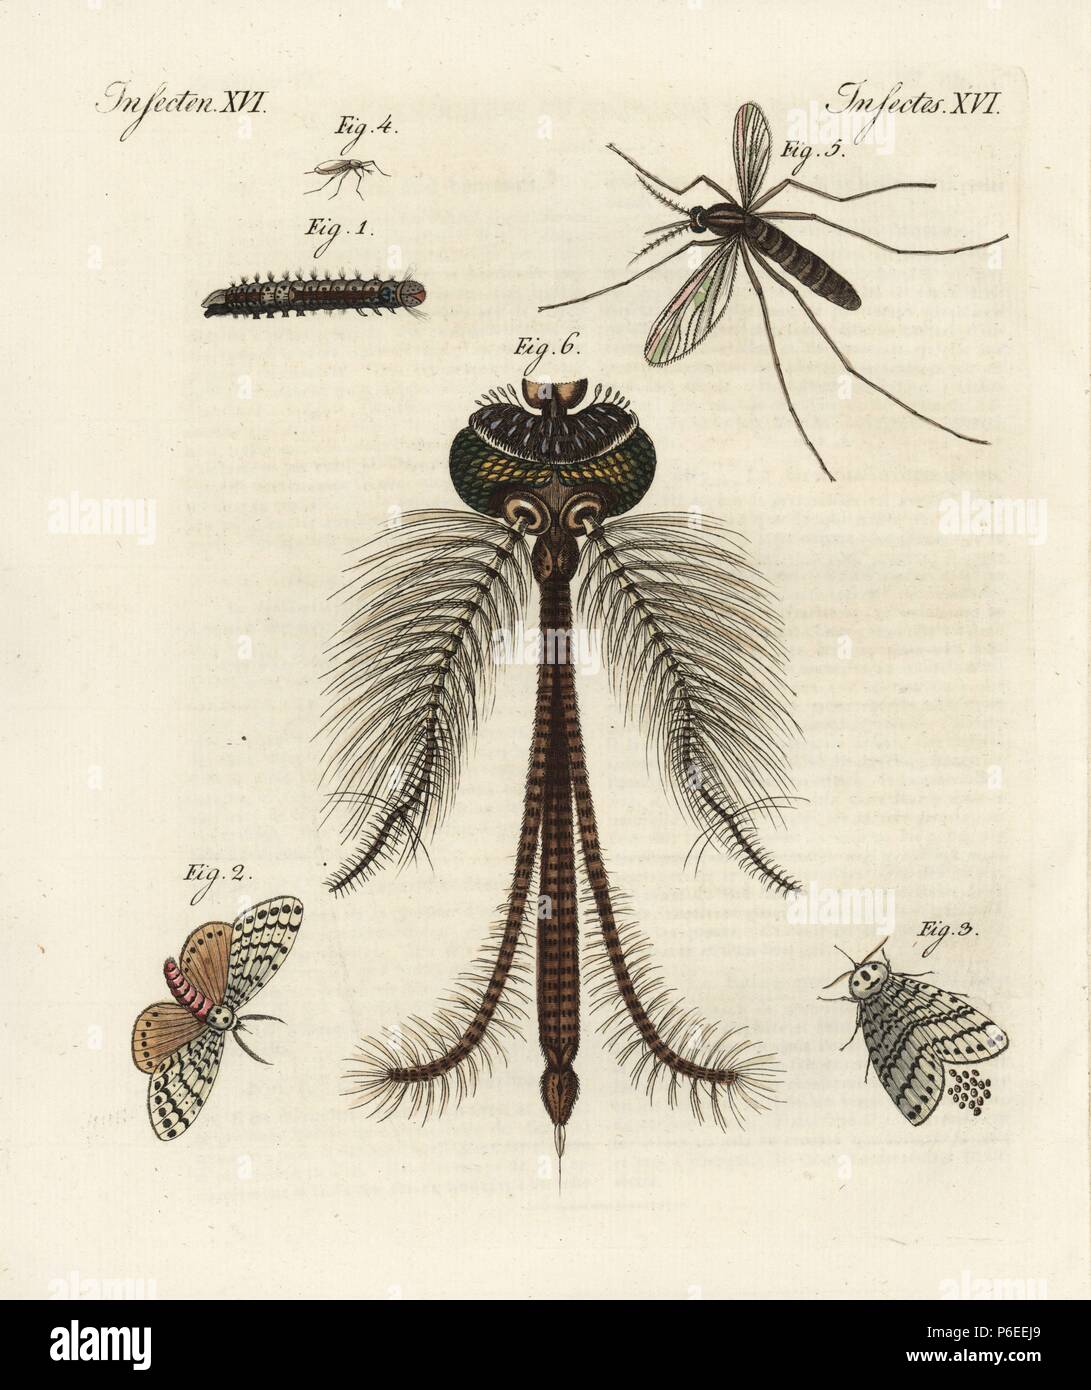 Nun moth, Lymantria monacha, caterpillar 1, moth, 2,3, and Phalaena bombyx monacha 1,2,3, and common house mosquito, Culex pipiens, 4,5, head and proboscis 6. Handcoloured copperplate engraving from Bertuch's 'Bilderbuch fur Kinder' (Picture Book for Children), Weimar, 1798. Friedrich Johann Bertuch (1747-1822) was a German publisher and man of arts most famous for his 12-volume encyclopedia for children illustrated with 1,200 engraved plates on natural history, science, costume, mythology, etc., published from 1790-1830. Stock Photo